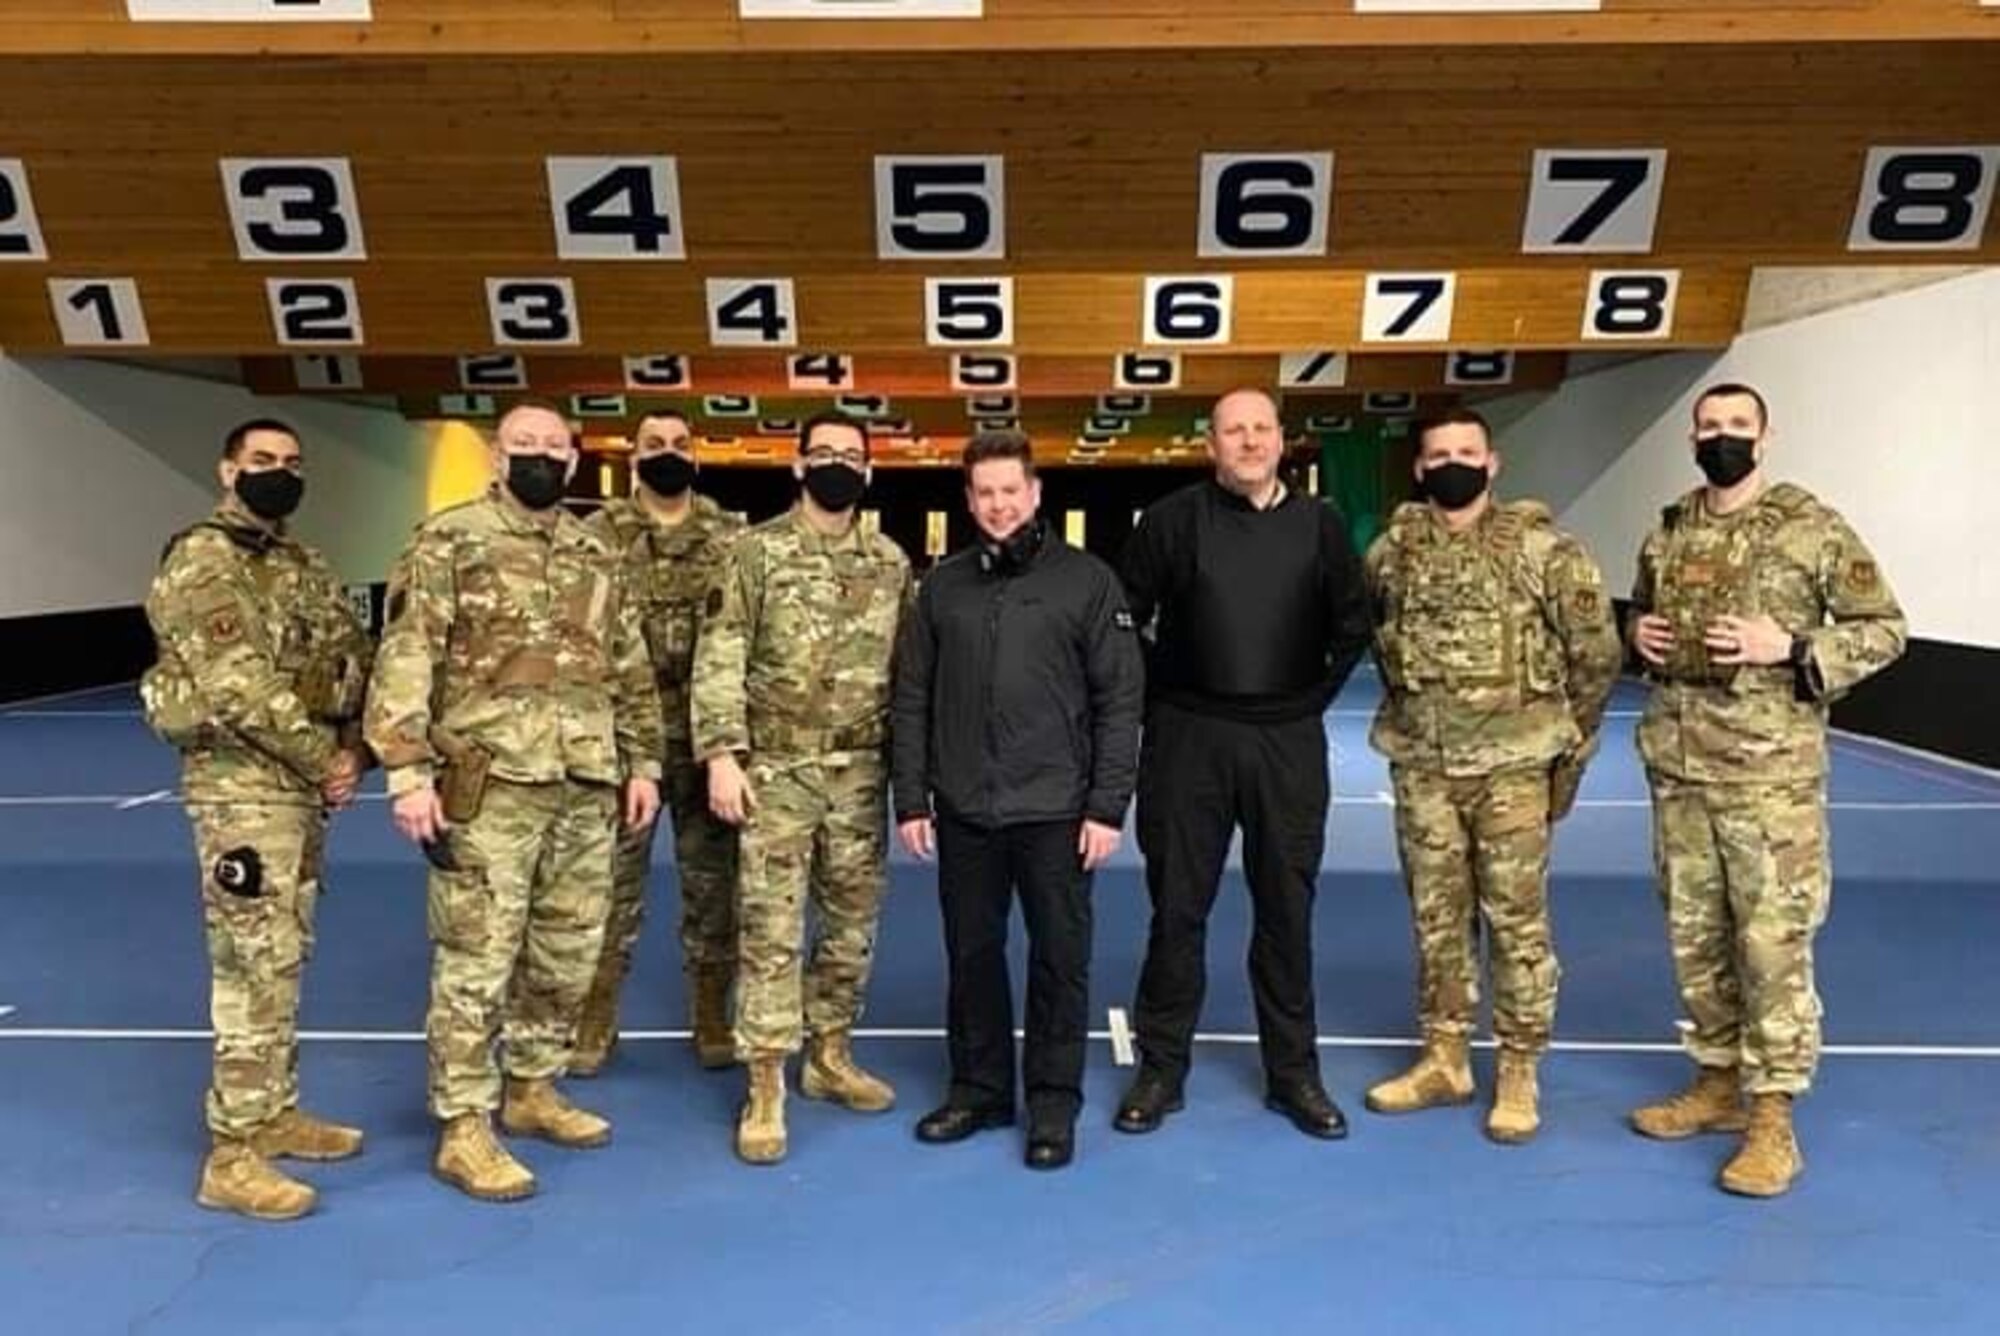 Airmen from the 422d Security Forces Squadron pose for a photo along with instructors from the Northamptonshire Police Department, Mar. 5, 2021.  Airmen from the 422d SFS utilized the NHPD firing range to help strengthen their tactics and techniques. Events like this help strengthen the local partnership between the 422d SFS and the NHPD. (U.S. Air Force photo by Staff Sgt. Carlos Sandoval)